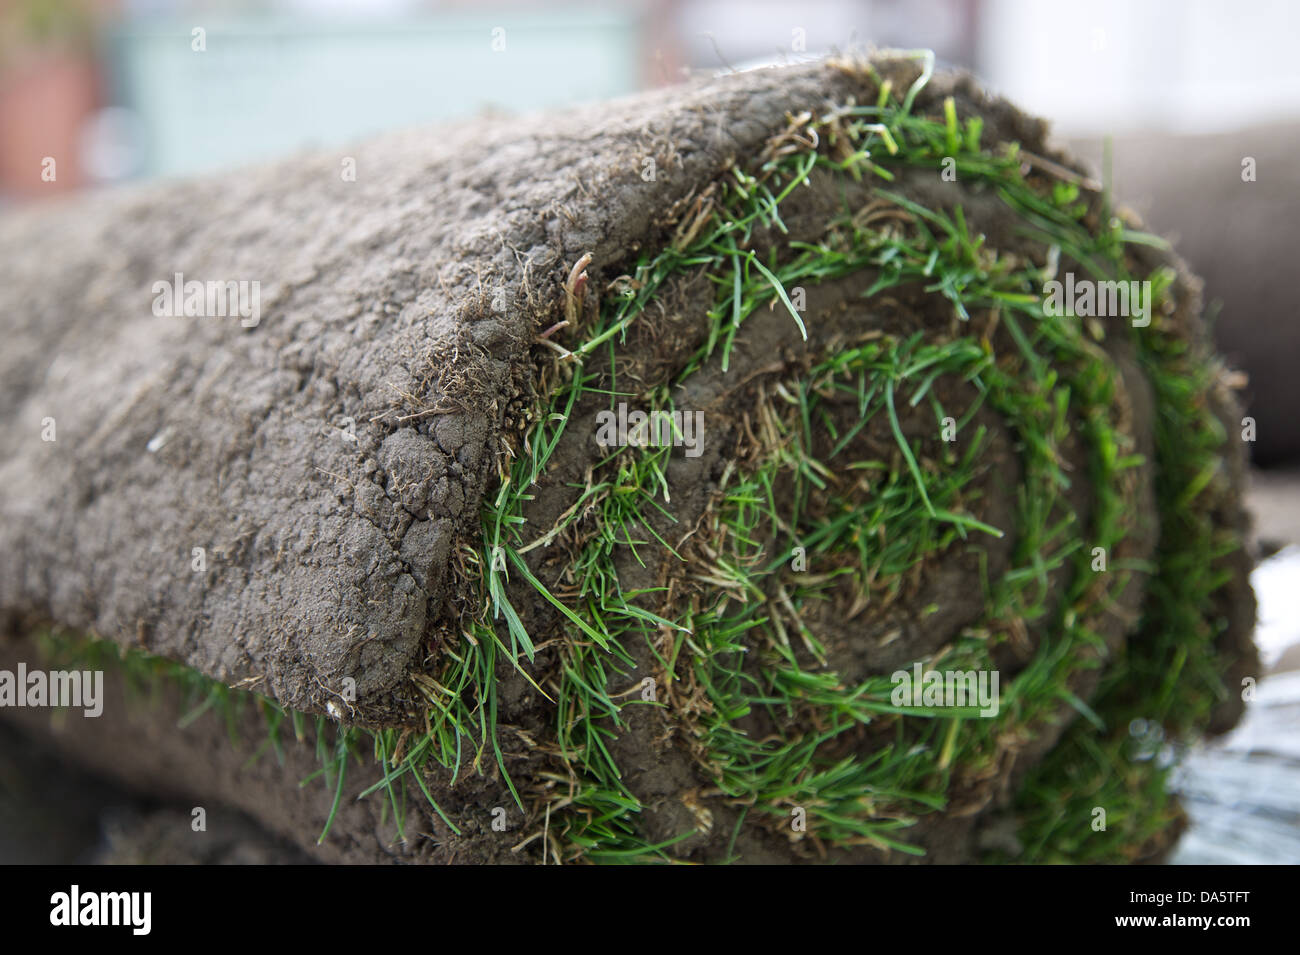 A roll of turf ready to be laid Stock Photo